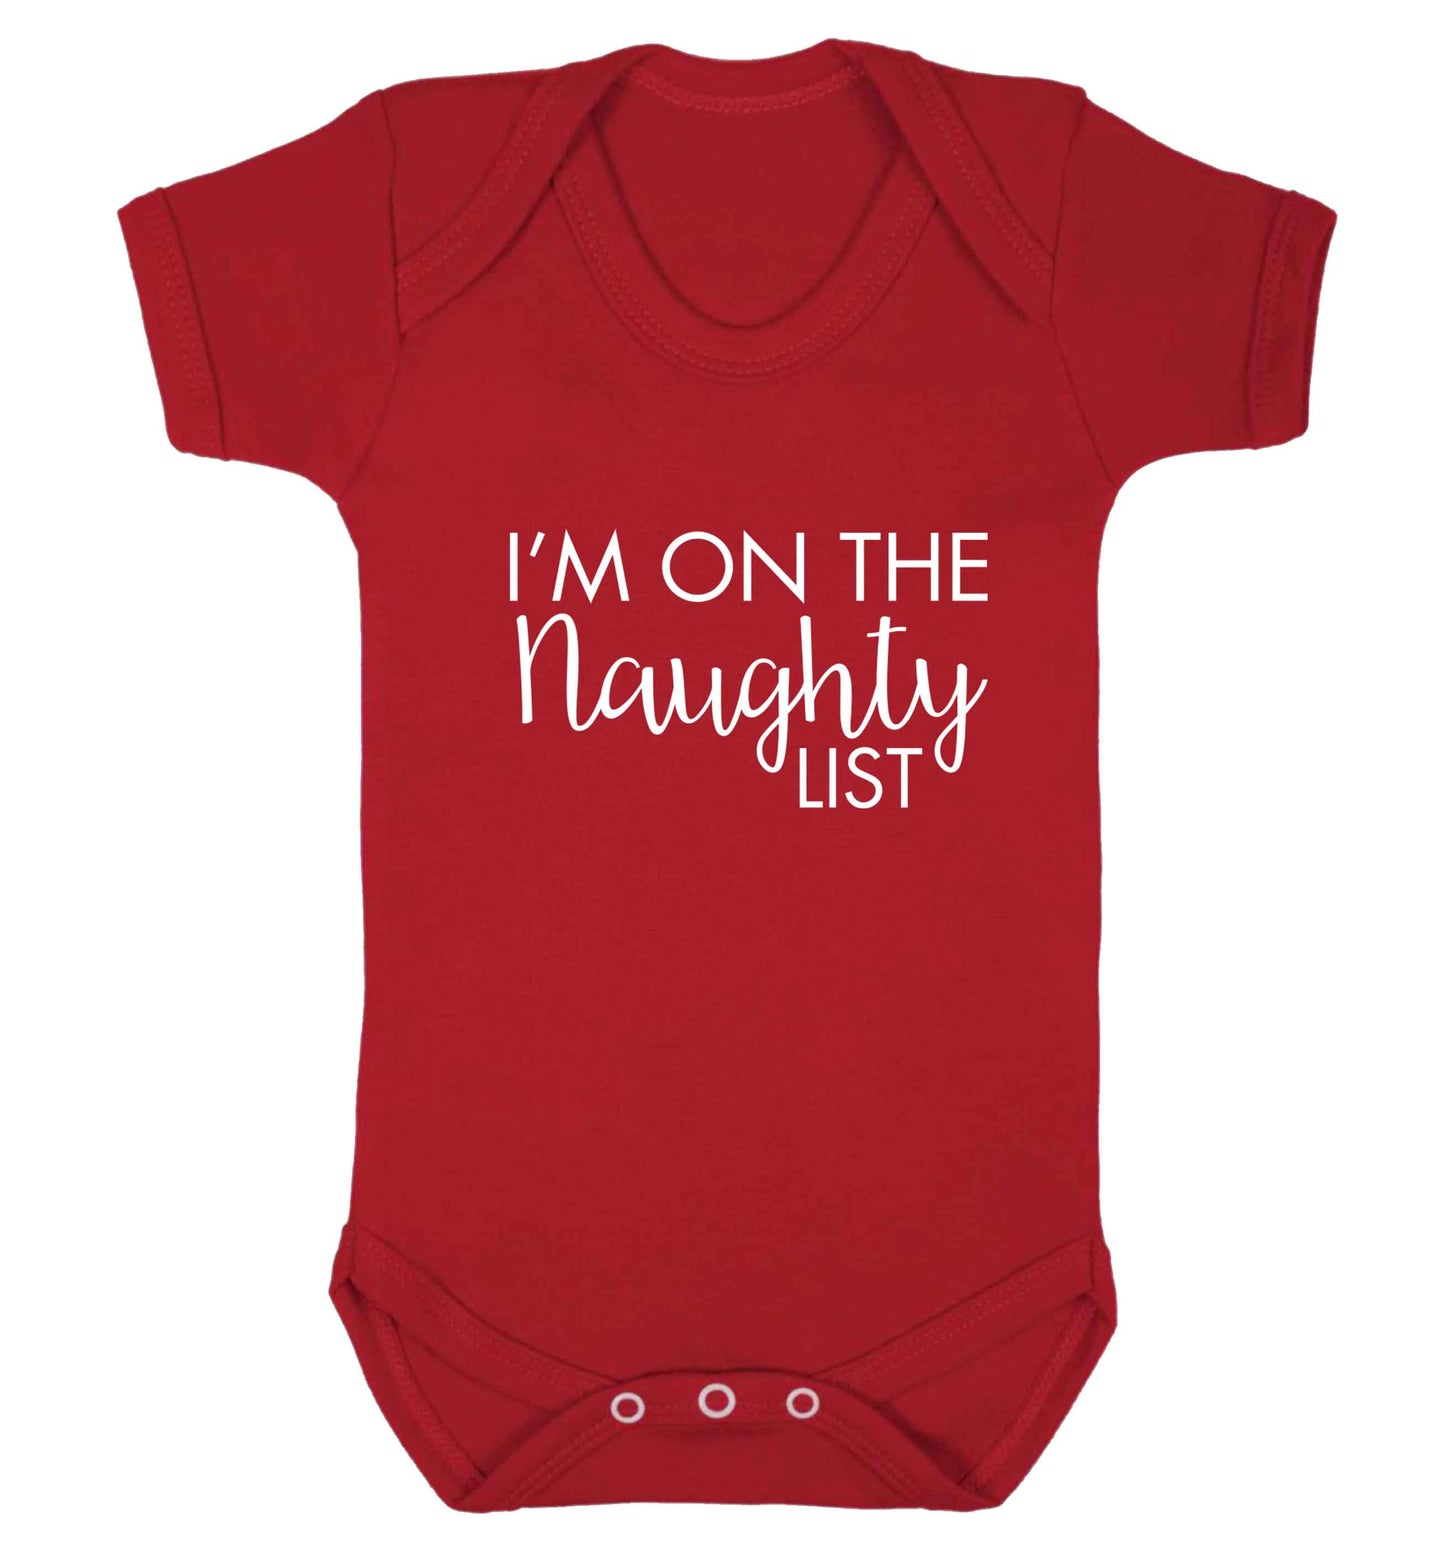 I'm on the naughty list baby vest red 18-24 months